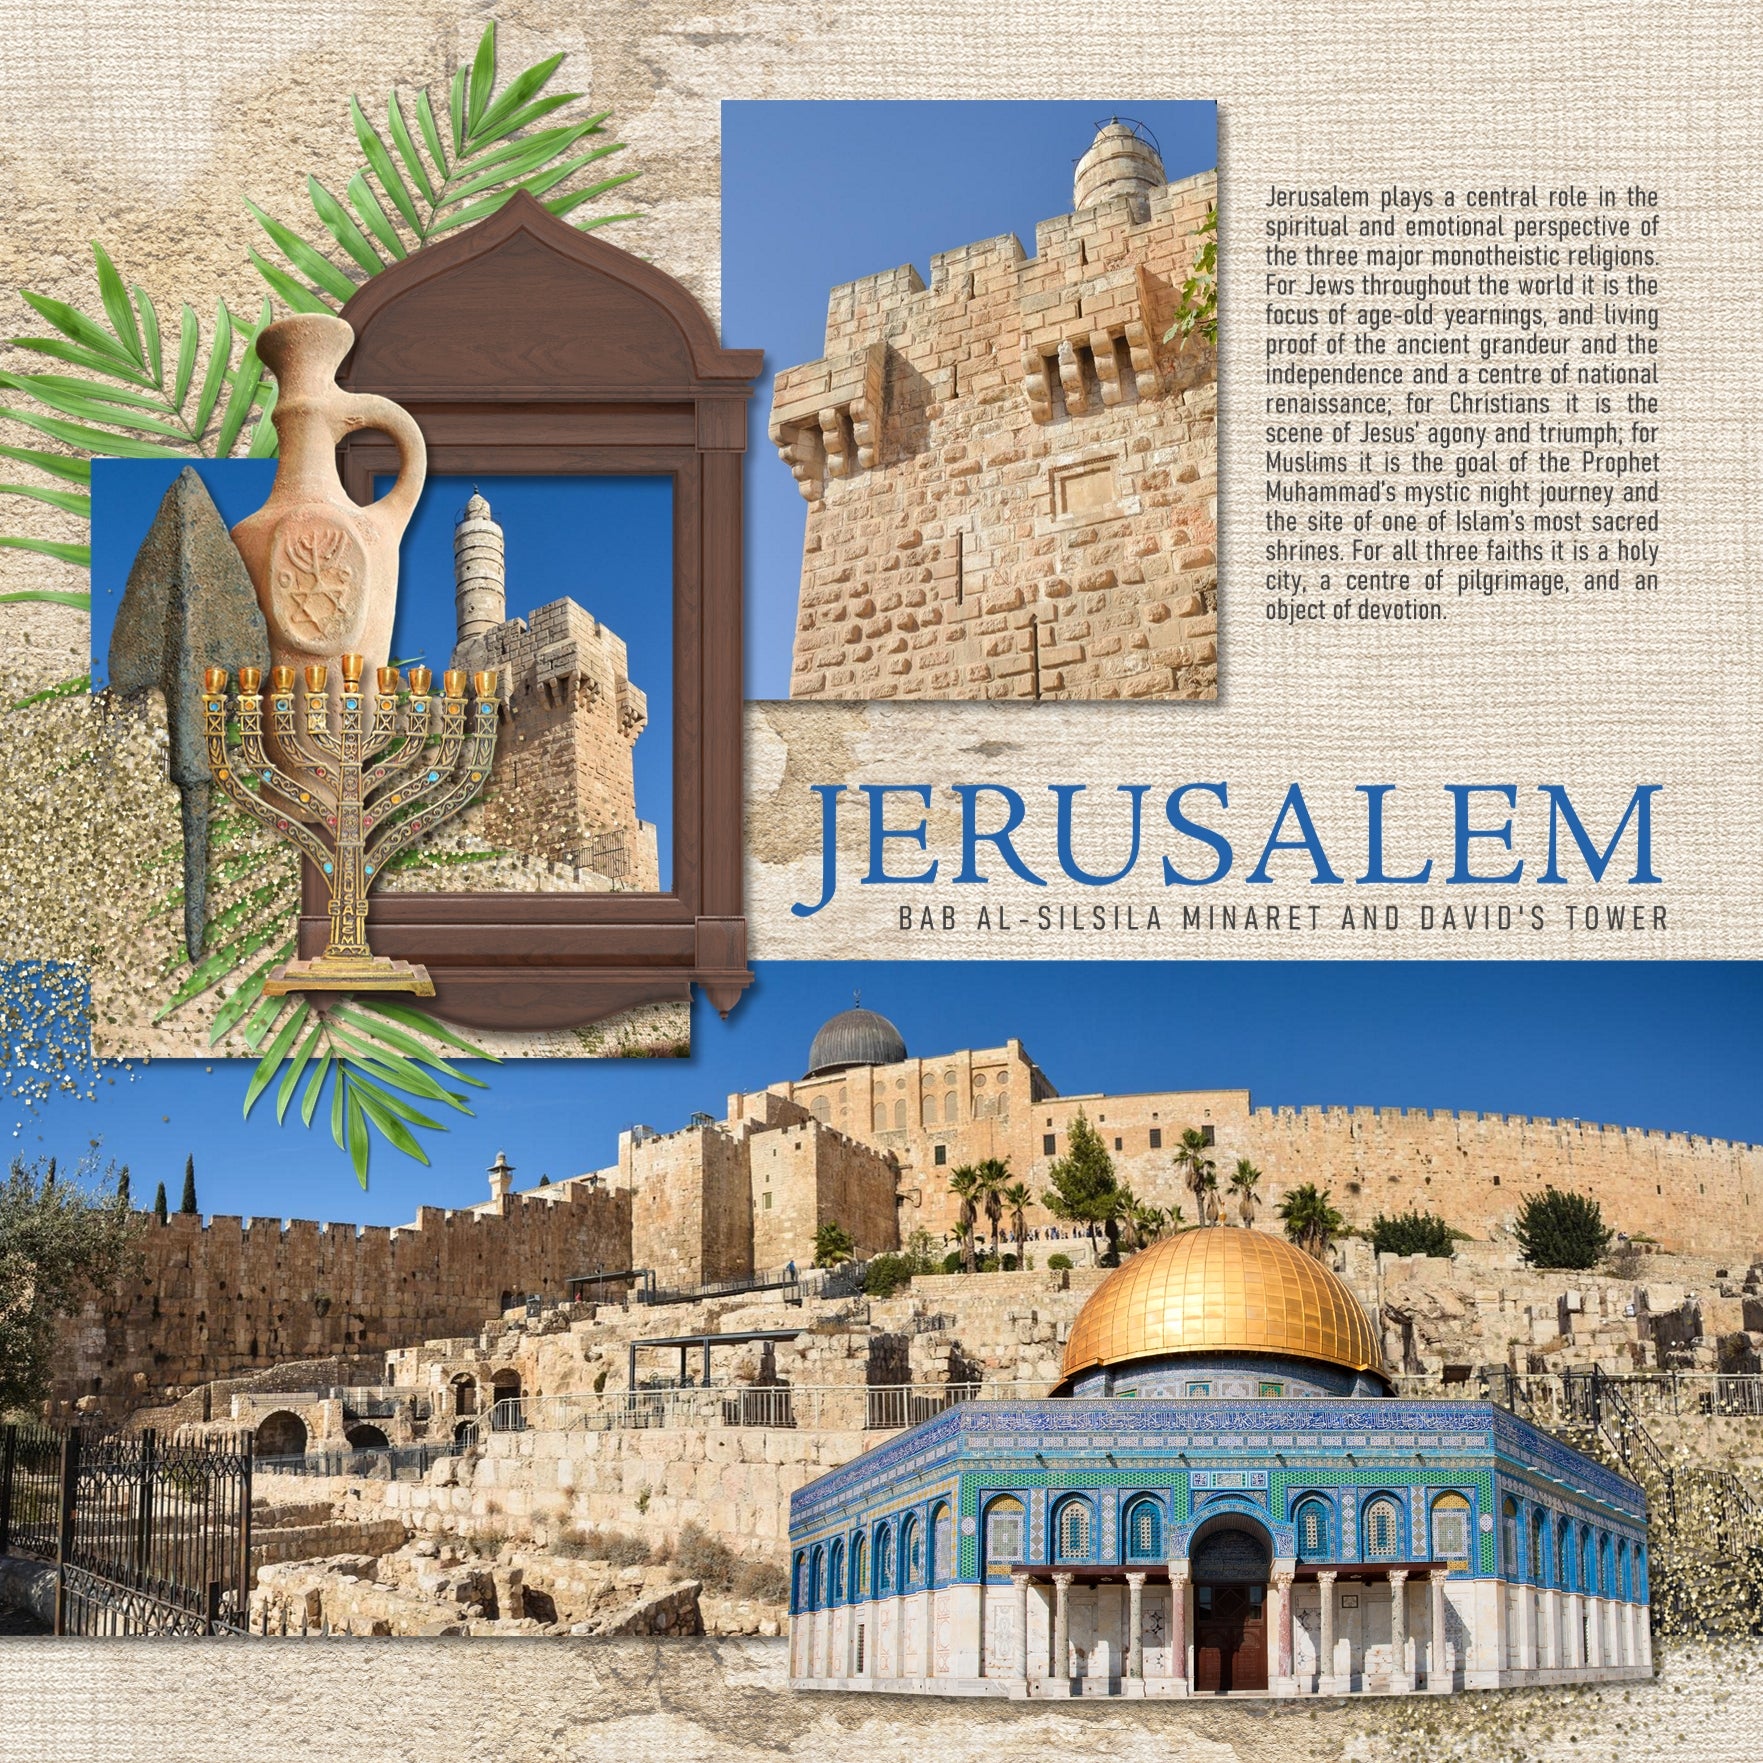 Adventure and explore the Holy Land with this beautiful and realistic travel digital art kit filled with ethnic embellishments and ancient papers. Whether you have taken a holiday to the Holy Land or are planning a vacation there, this collection will authentically accent your photos from Israel, Palestine, Jordan, Lebanon, and Syria in the Middle East.